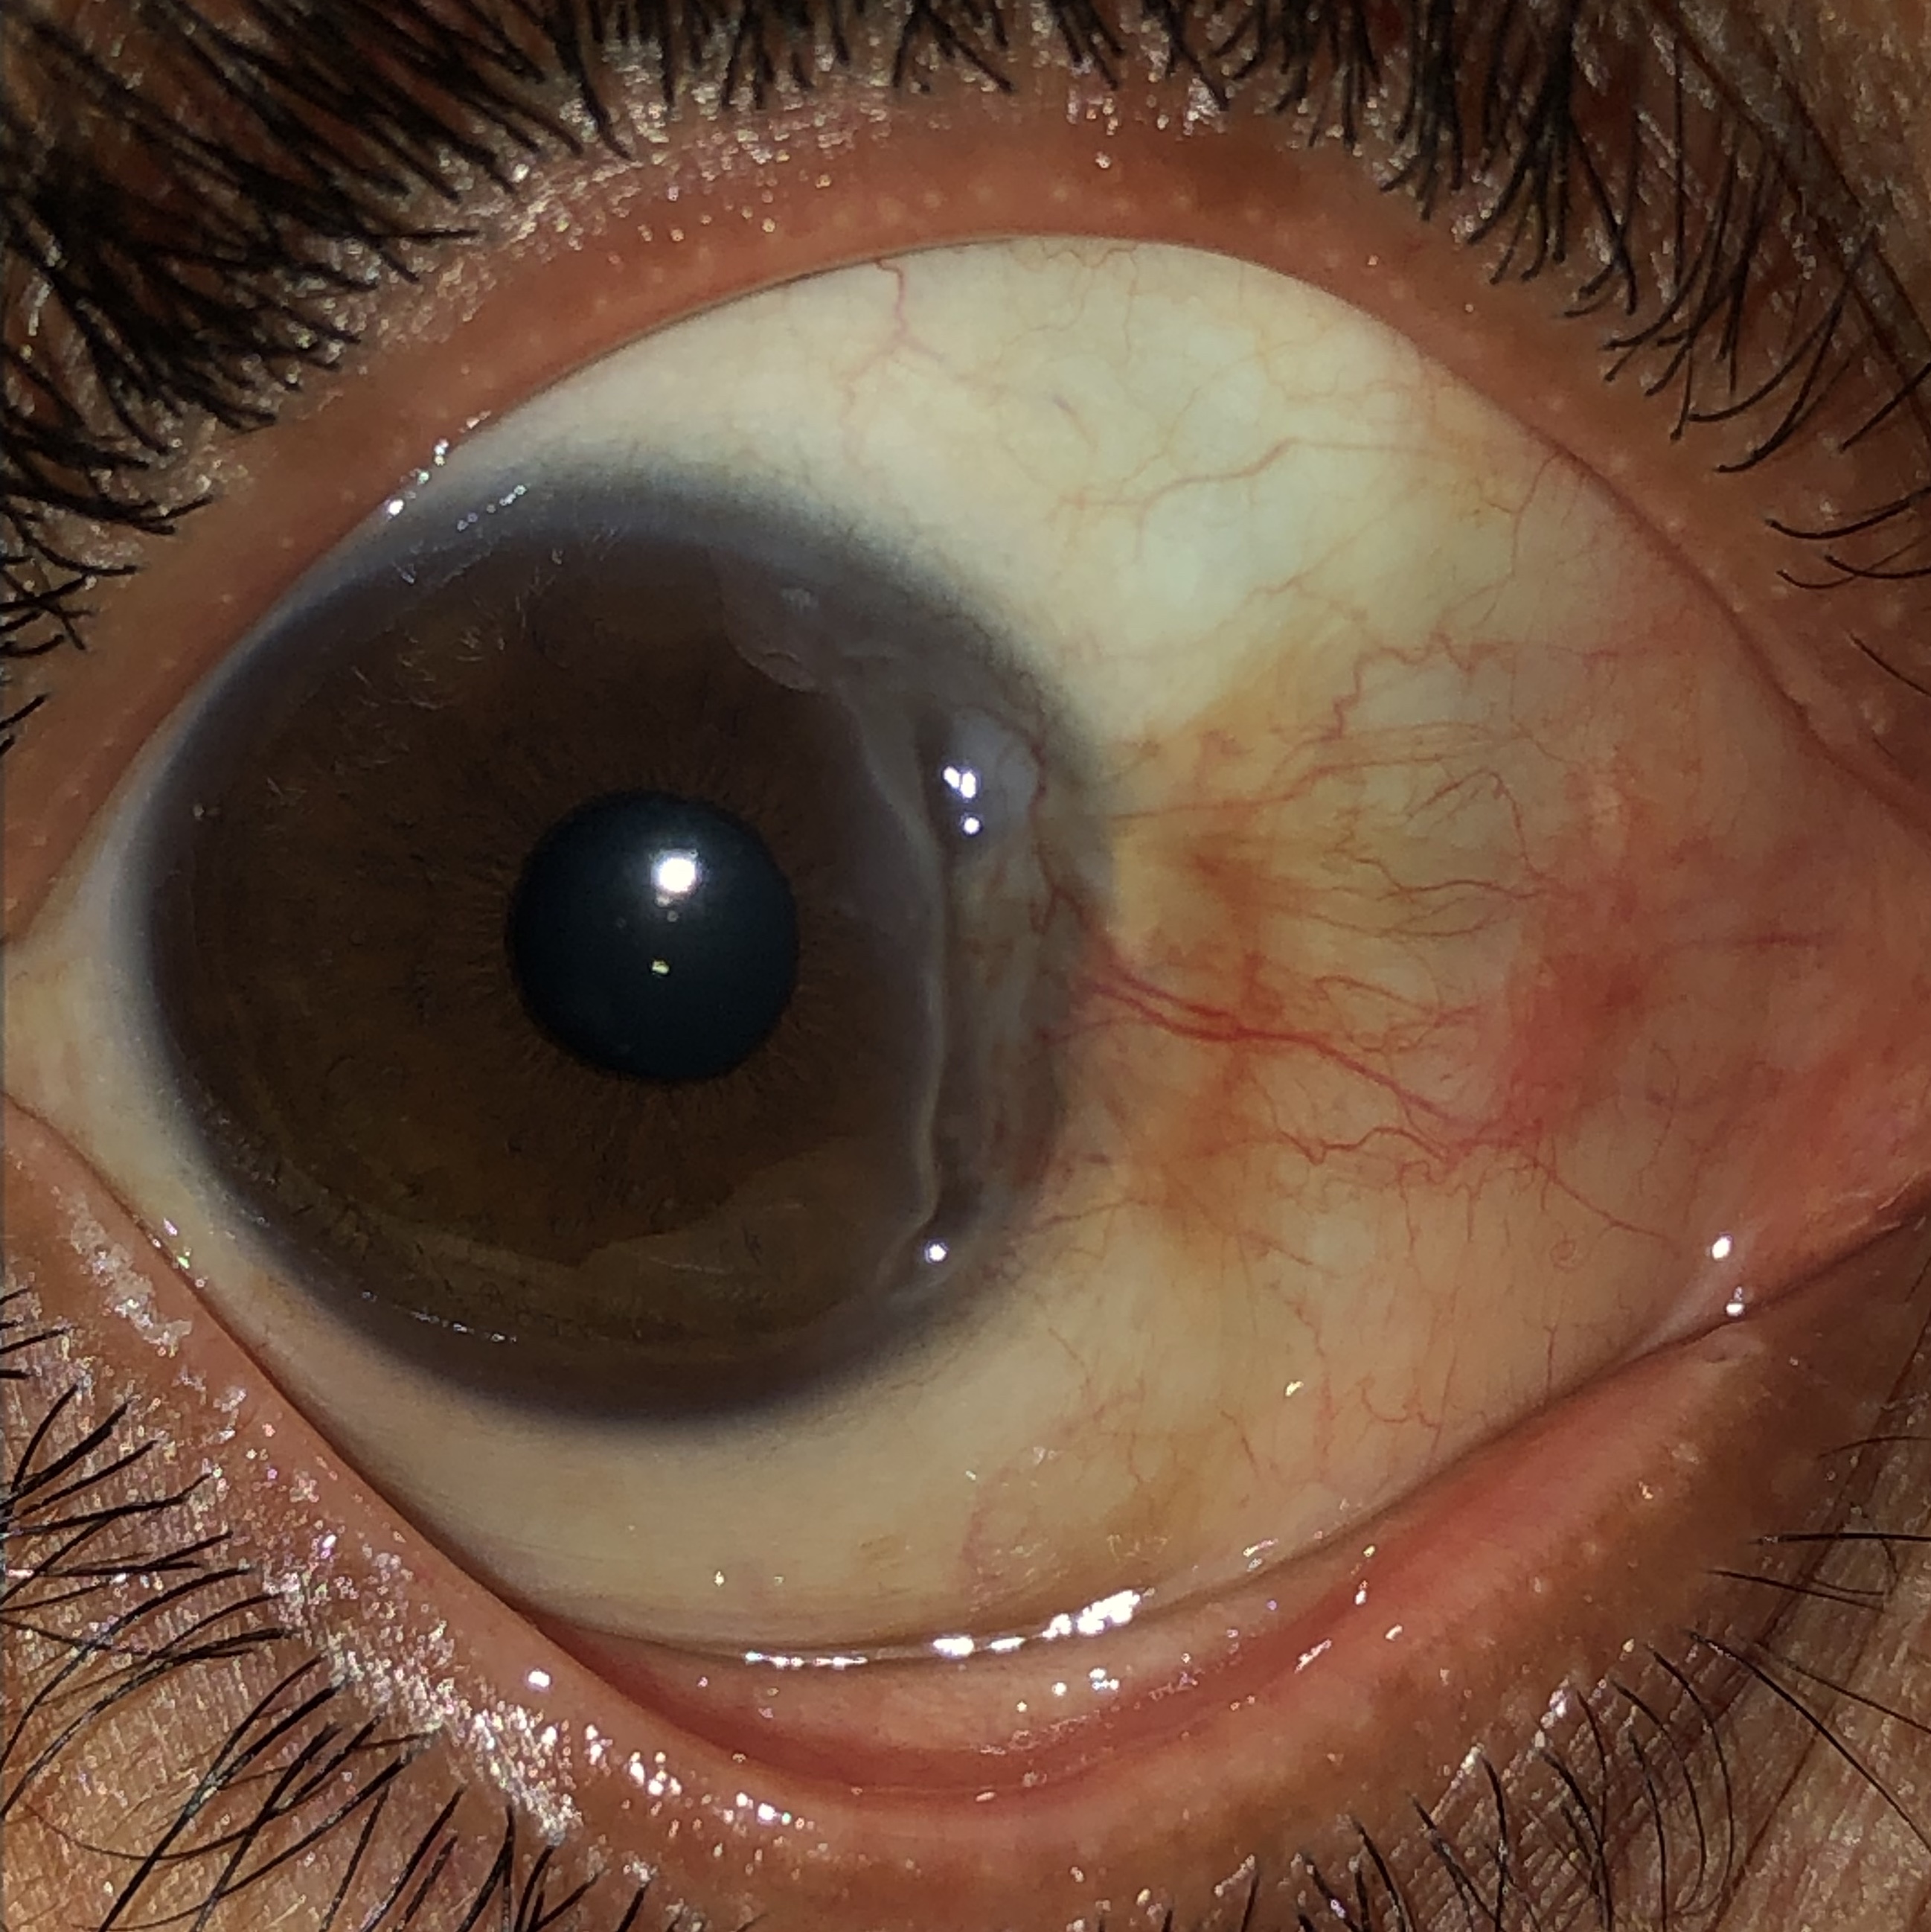 Peripheral corneal ulceration American Academy of Ophthalmology